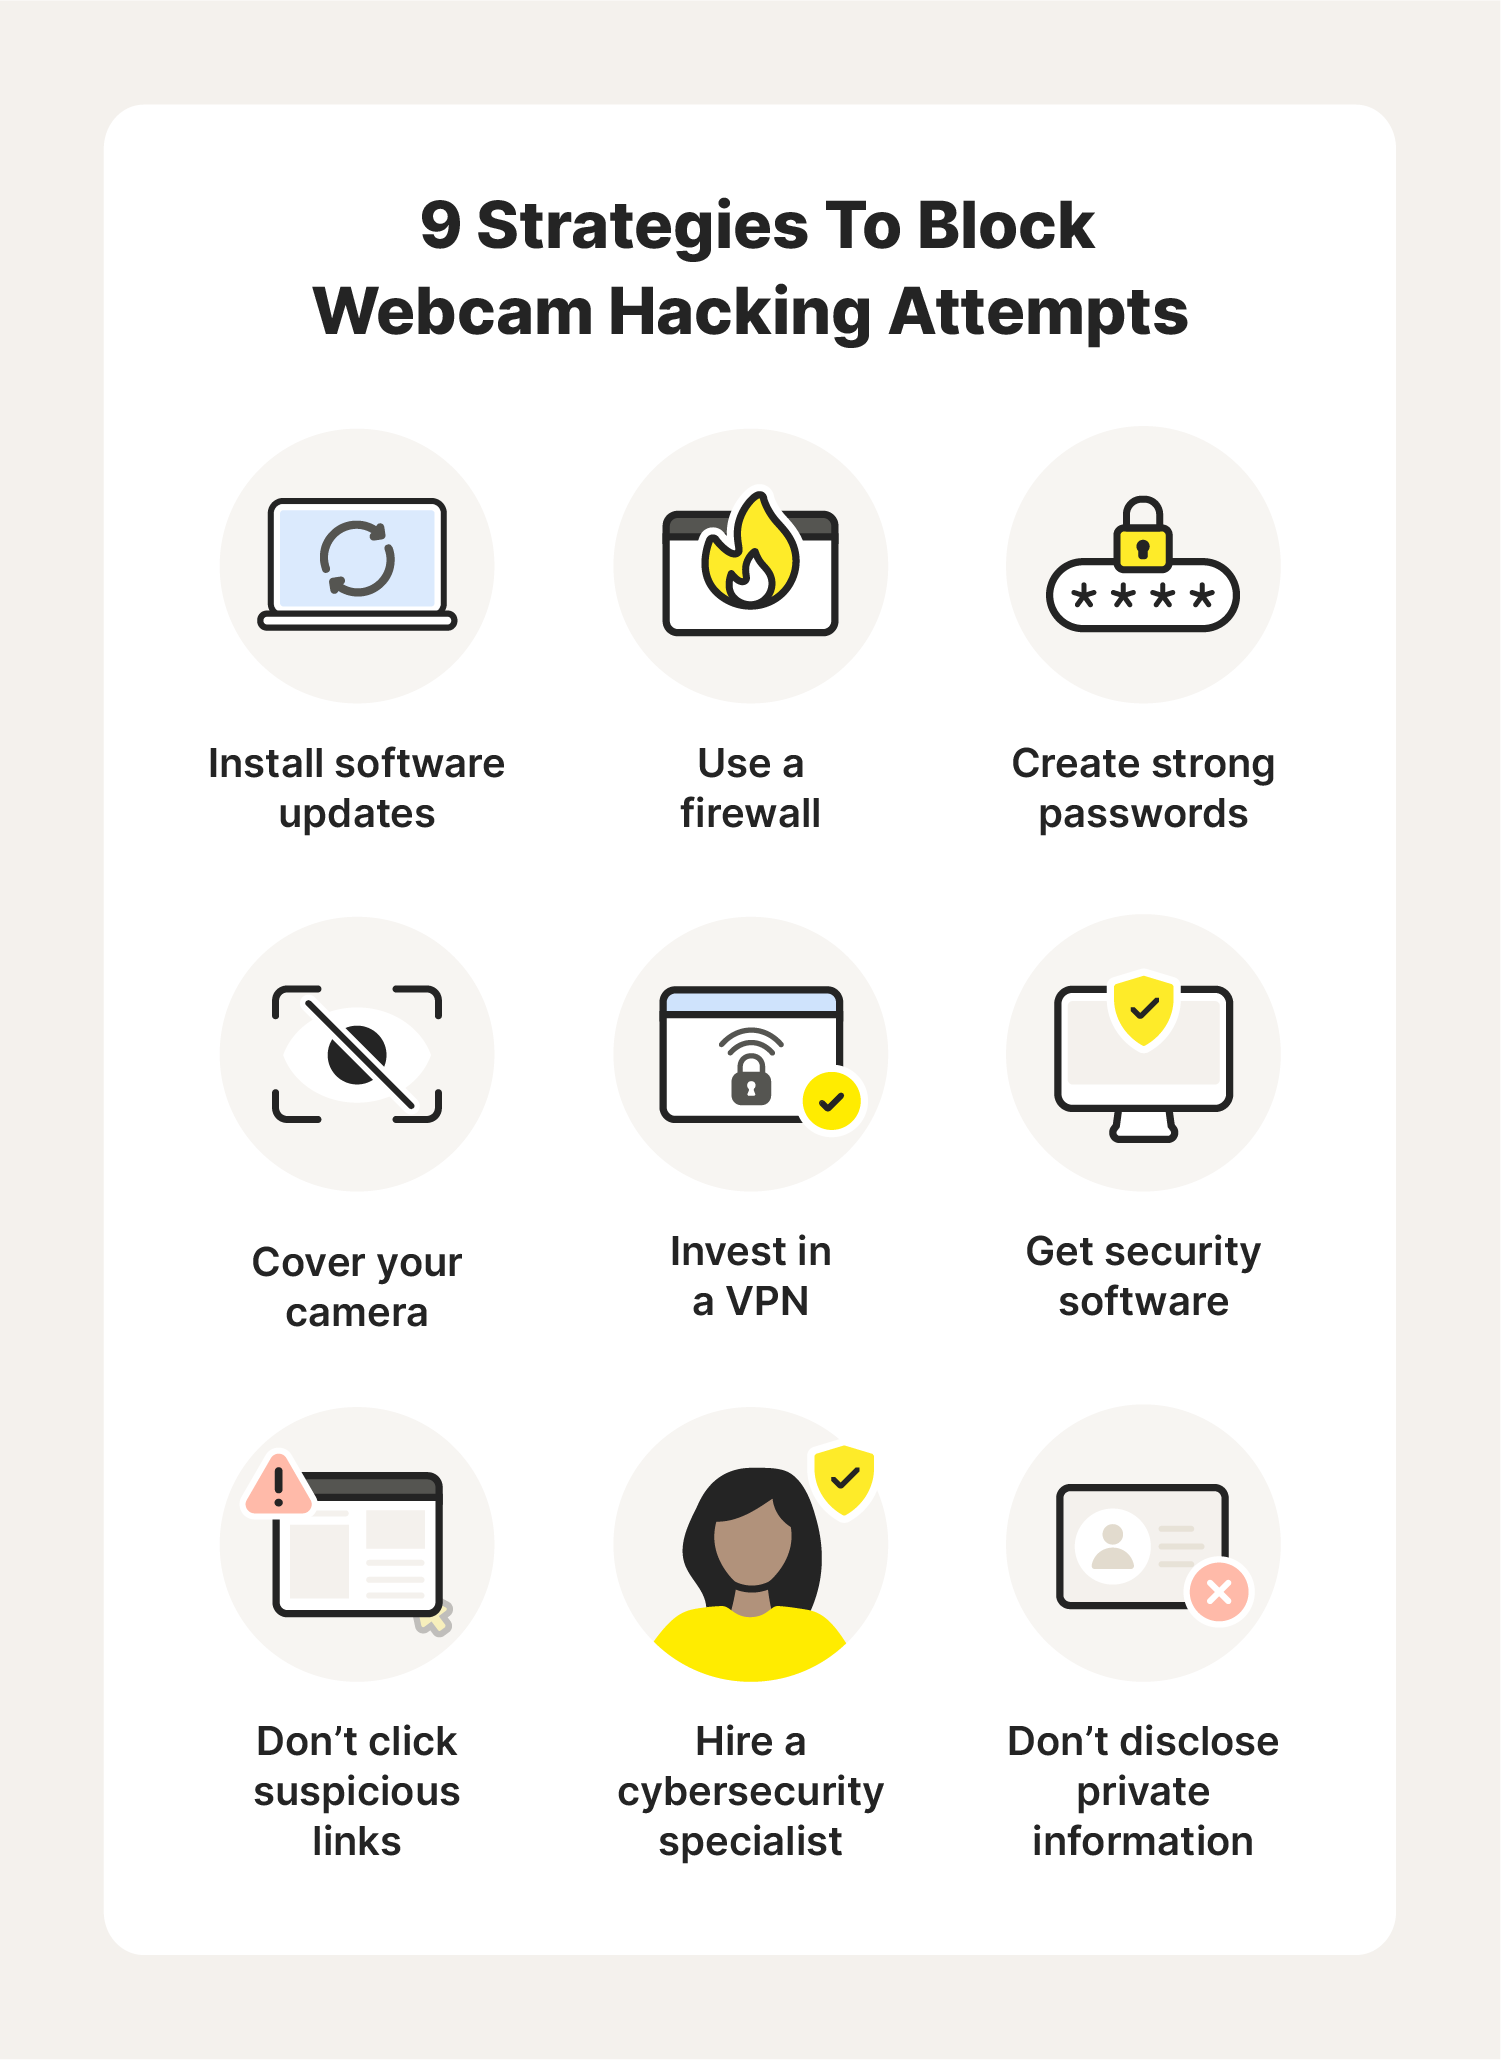 An image shows a repurposed game plan that outlines nine strategies people can use to safeguard their webcam against hackers.